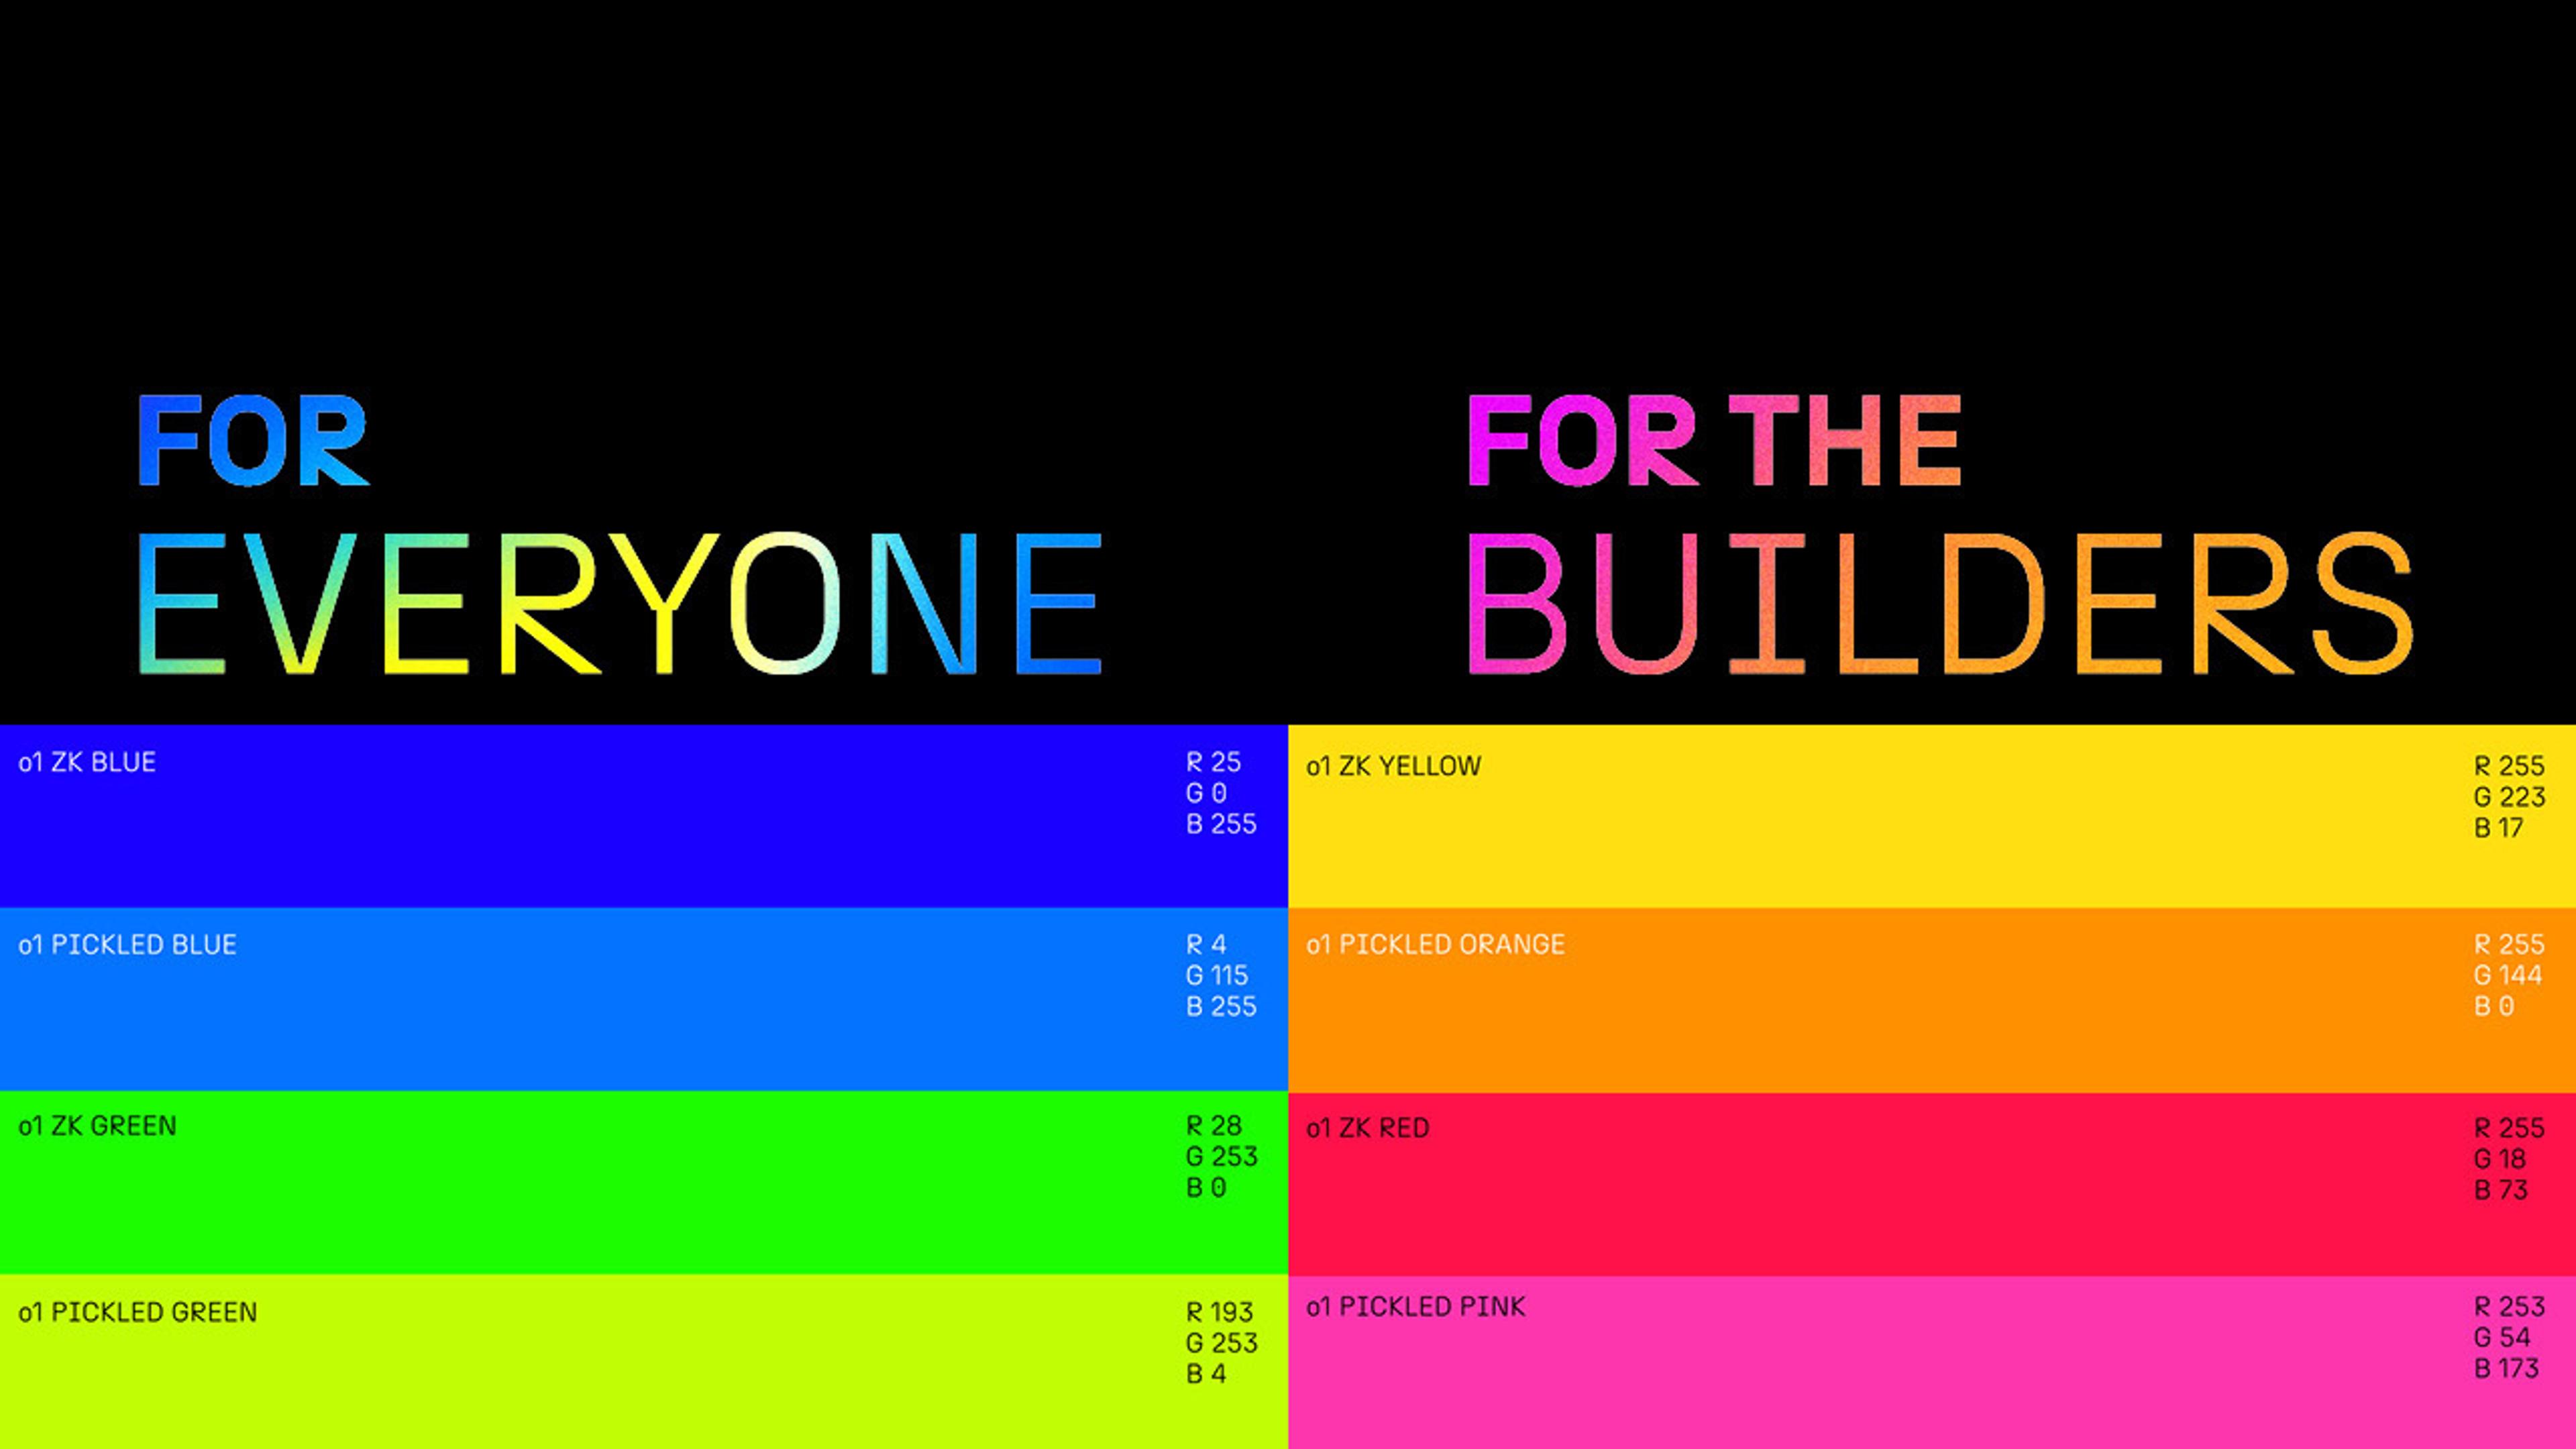 Two color schemes are shown. On the left is "For Everyone" with a blue to green gradient, and on the right is "For the Builders" with a yellow to pink gradient. 
